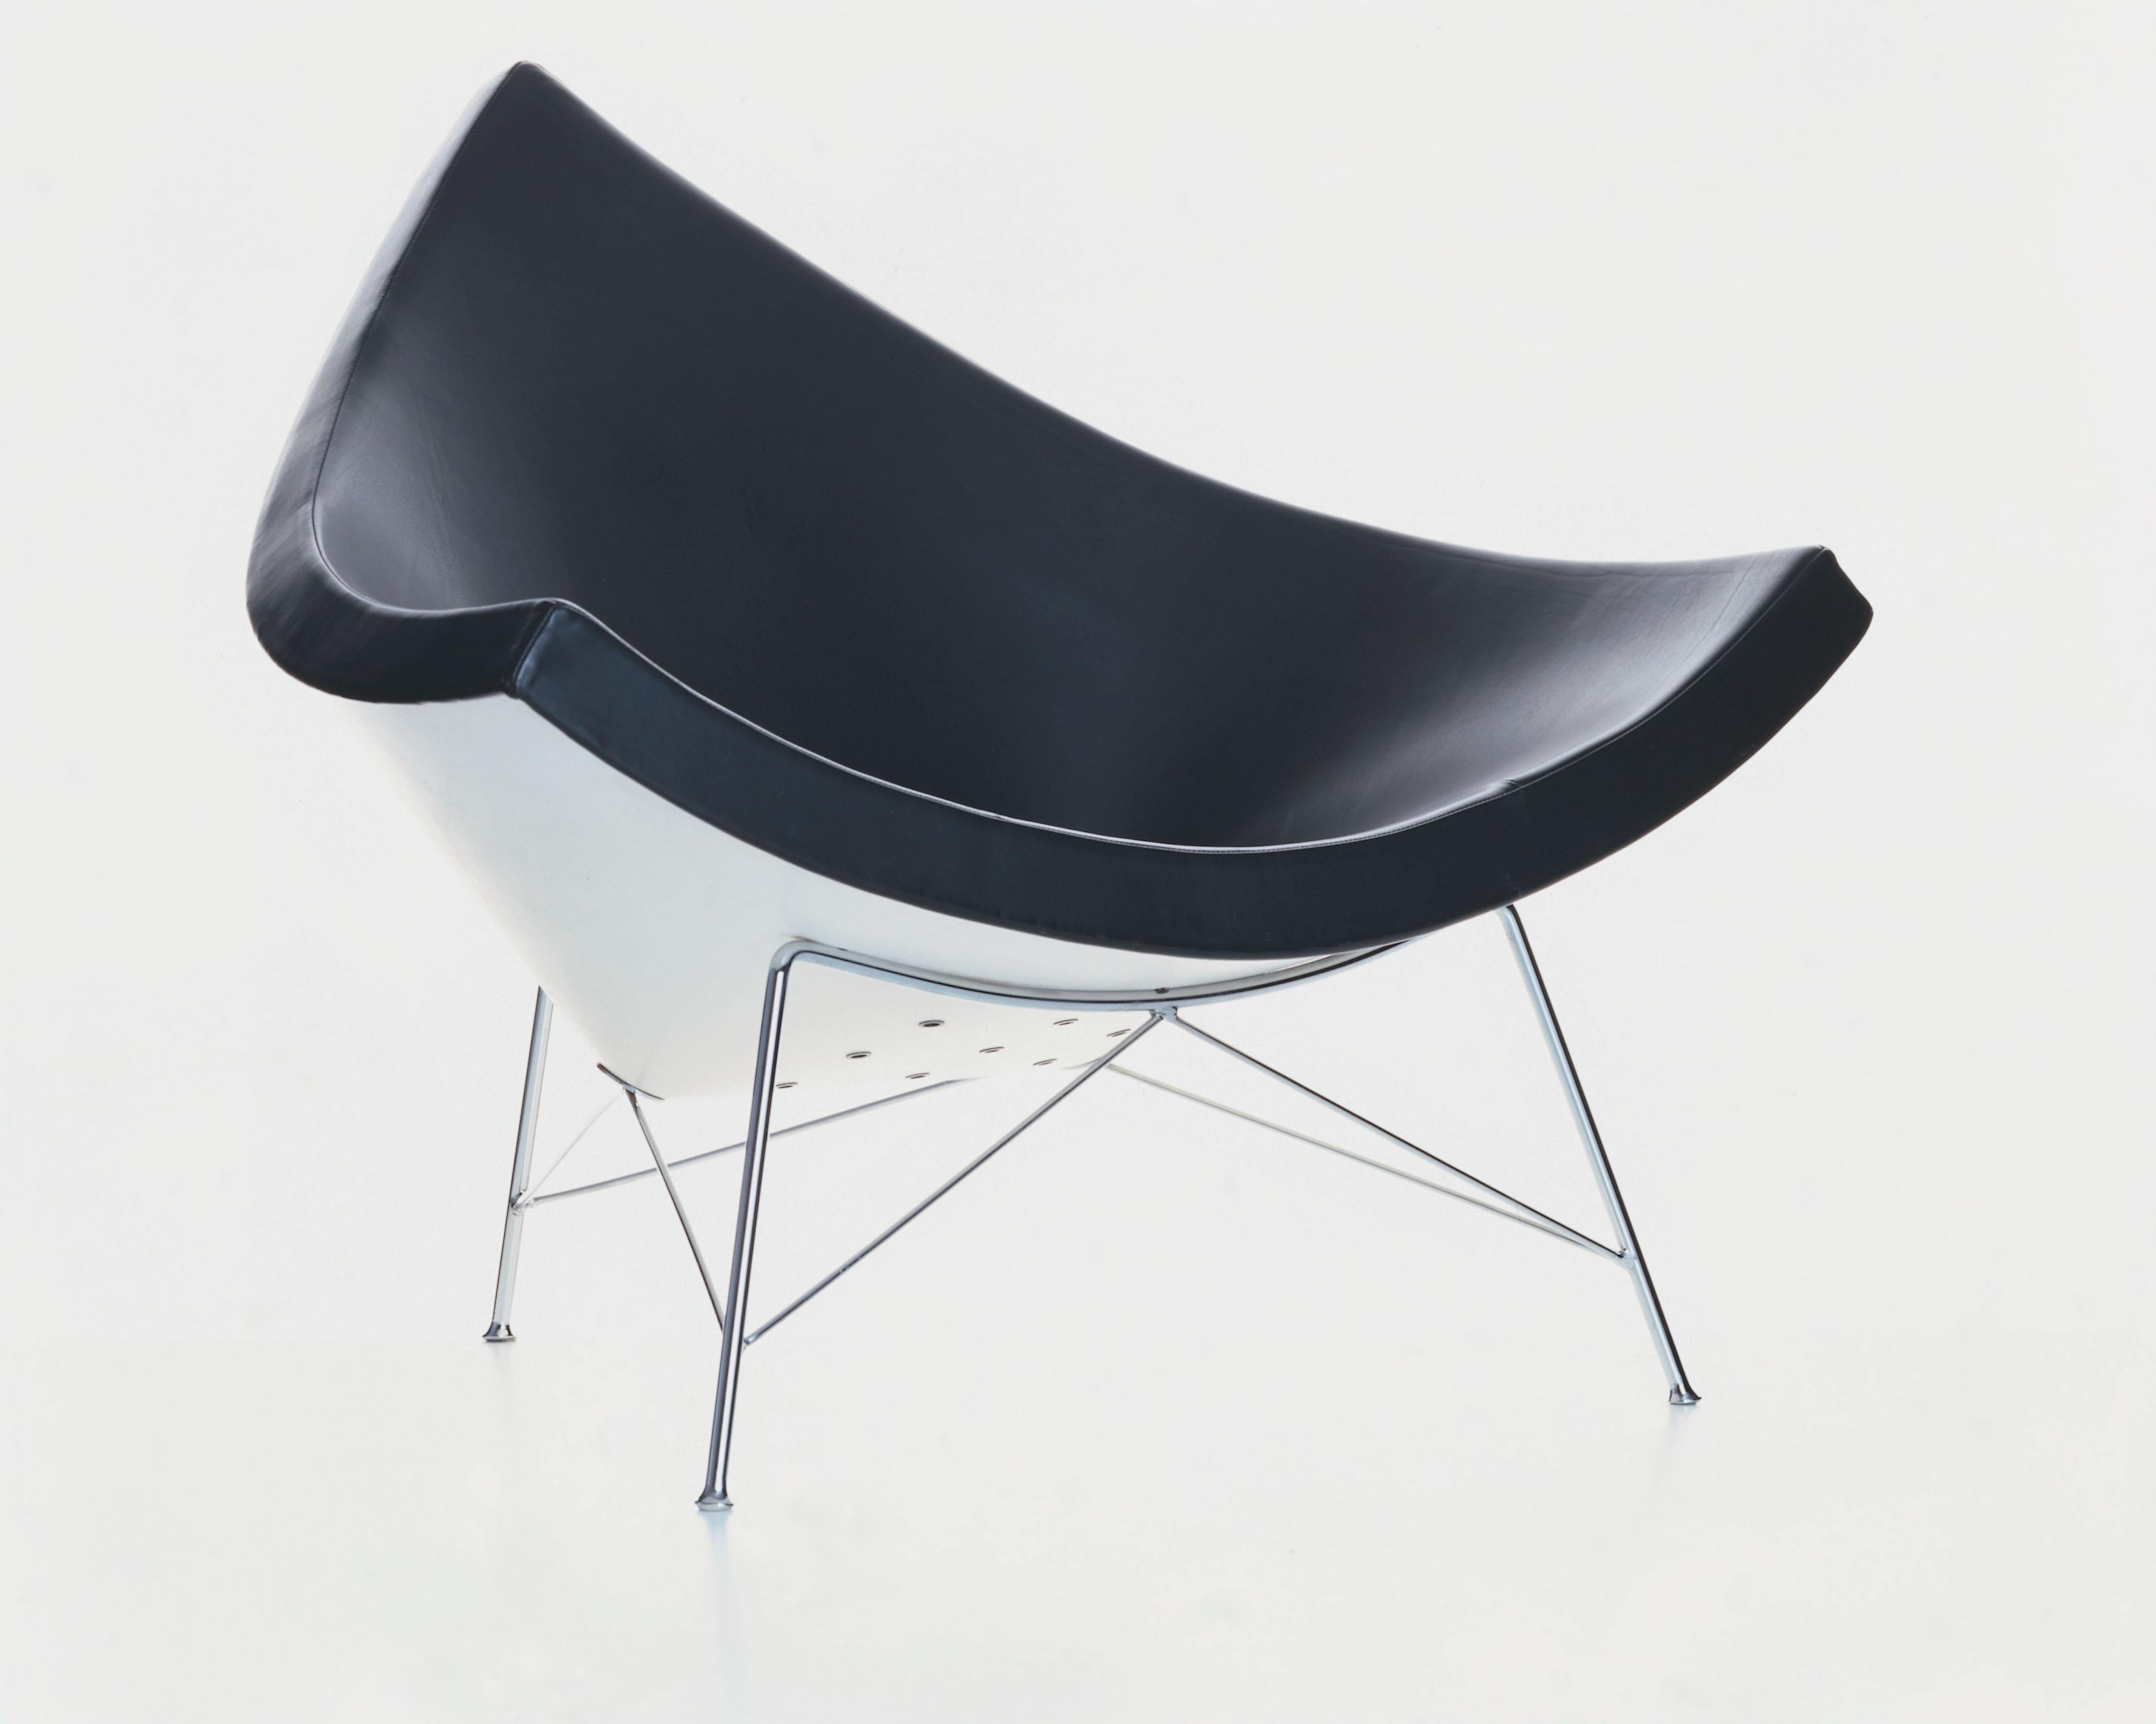 Hand-Crafted Vitra Miniature Coconut Chair in Black with Chrome Legs by George Nelson For Sale